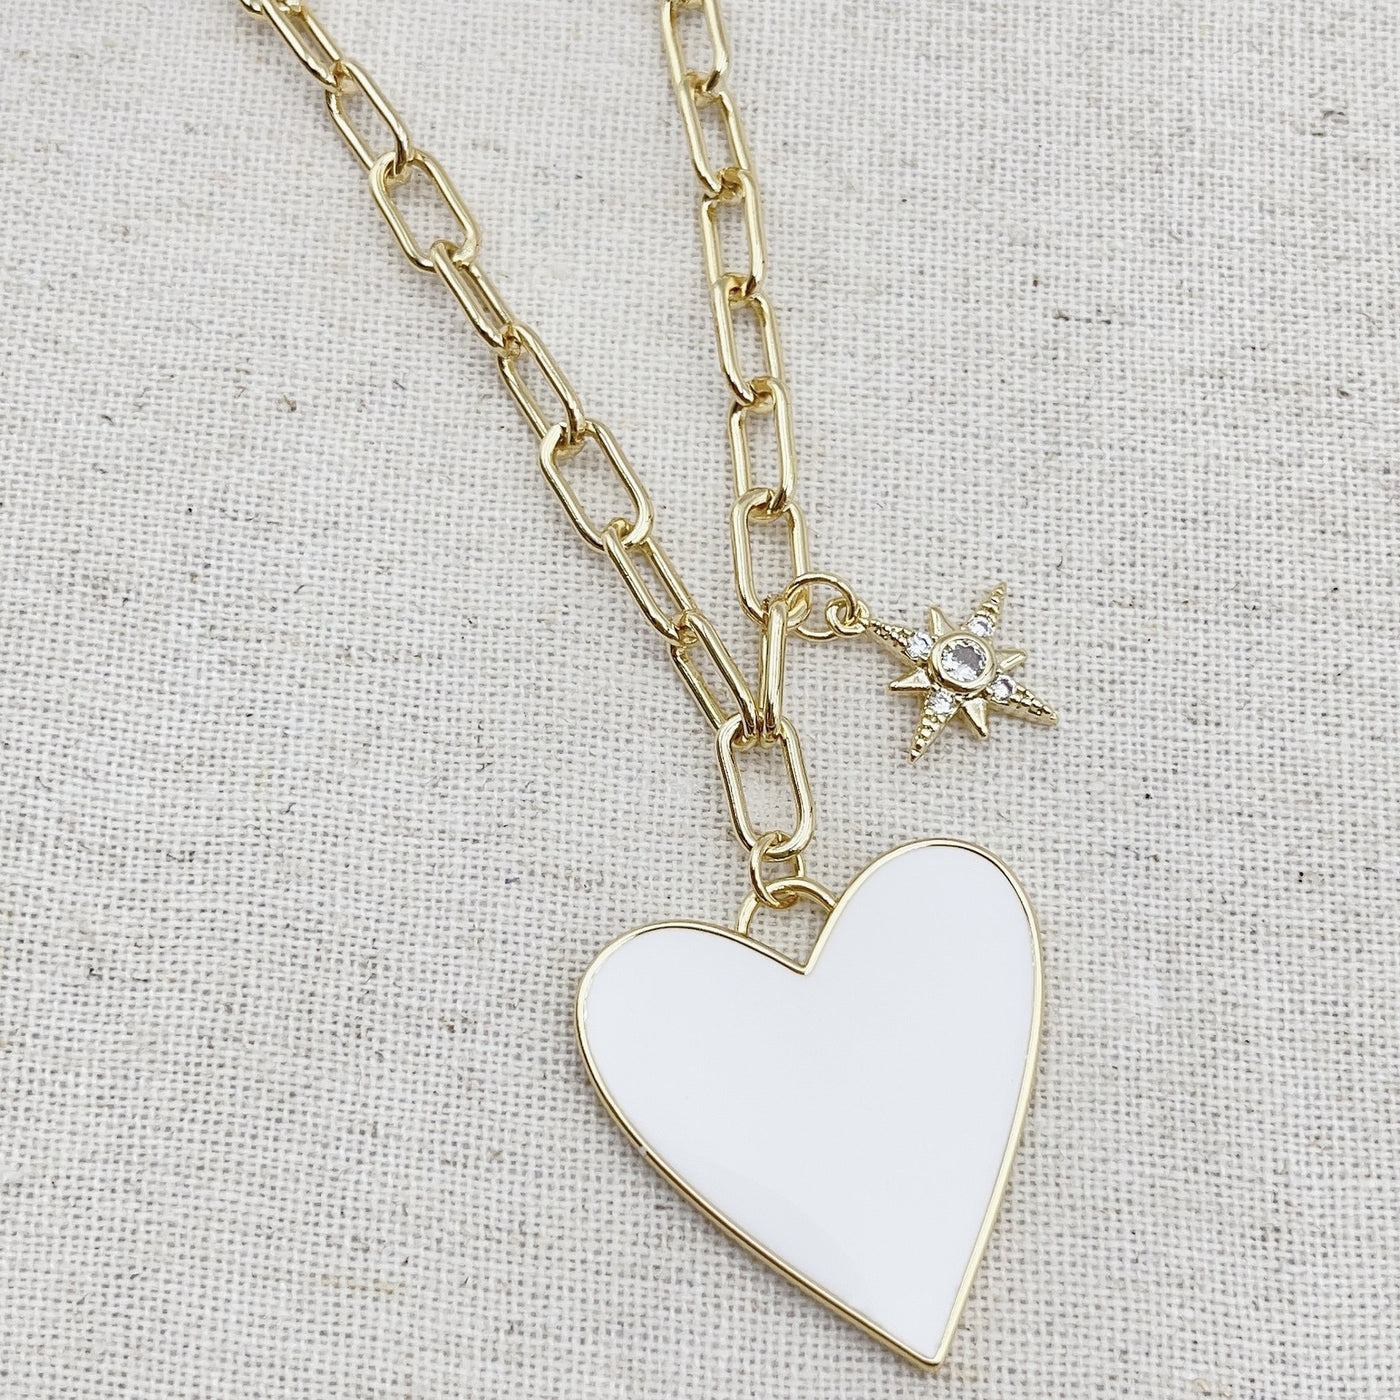 Babe White Heart Necklace